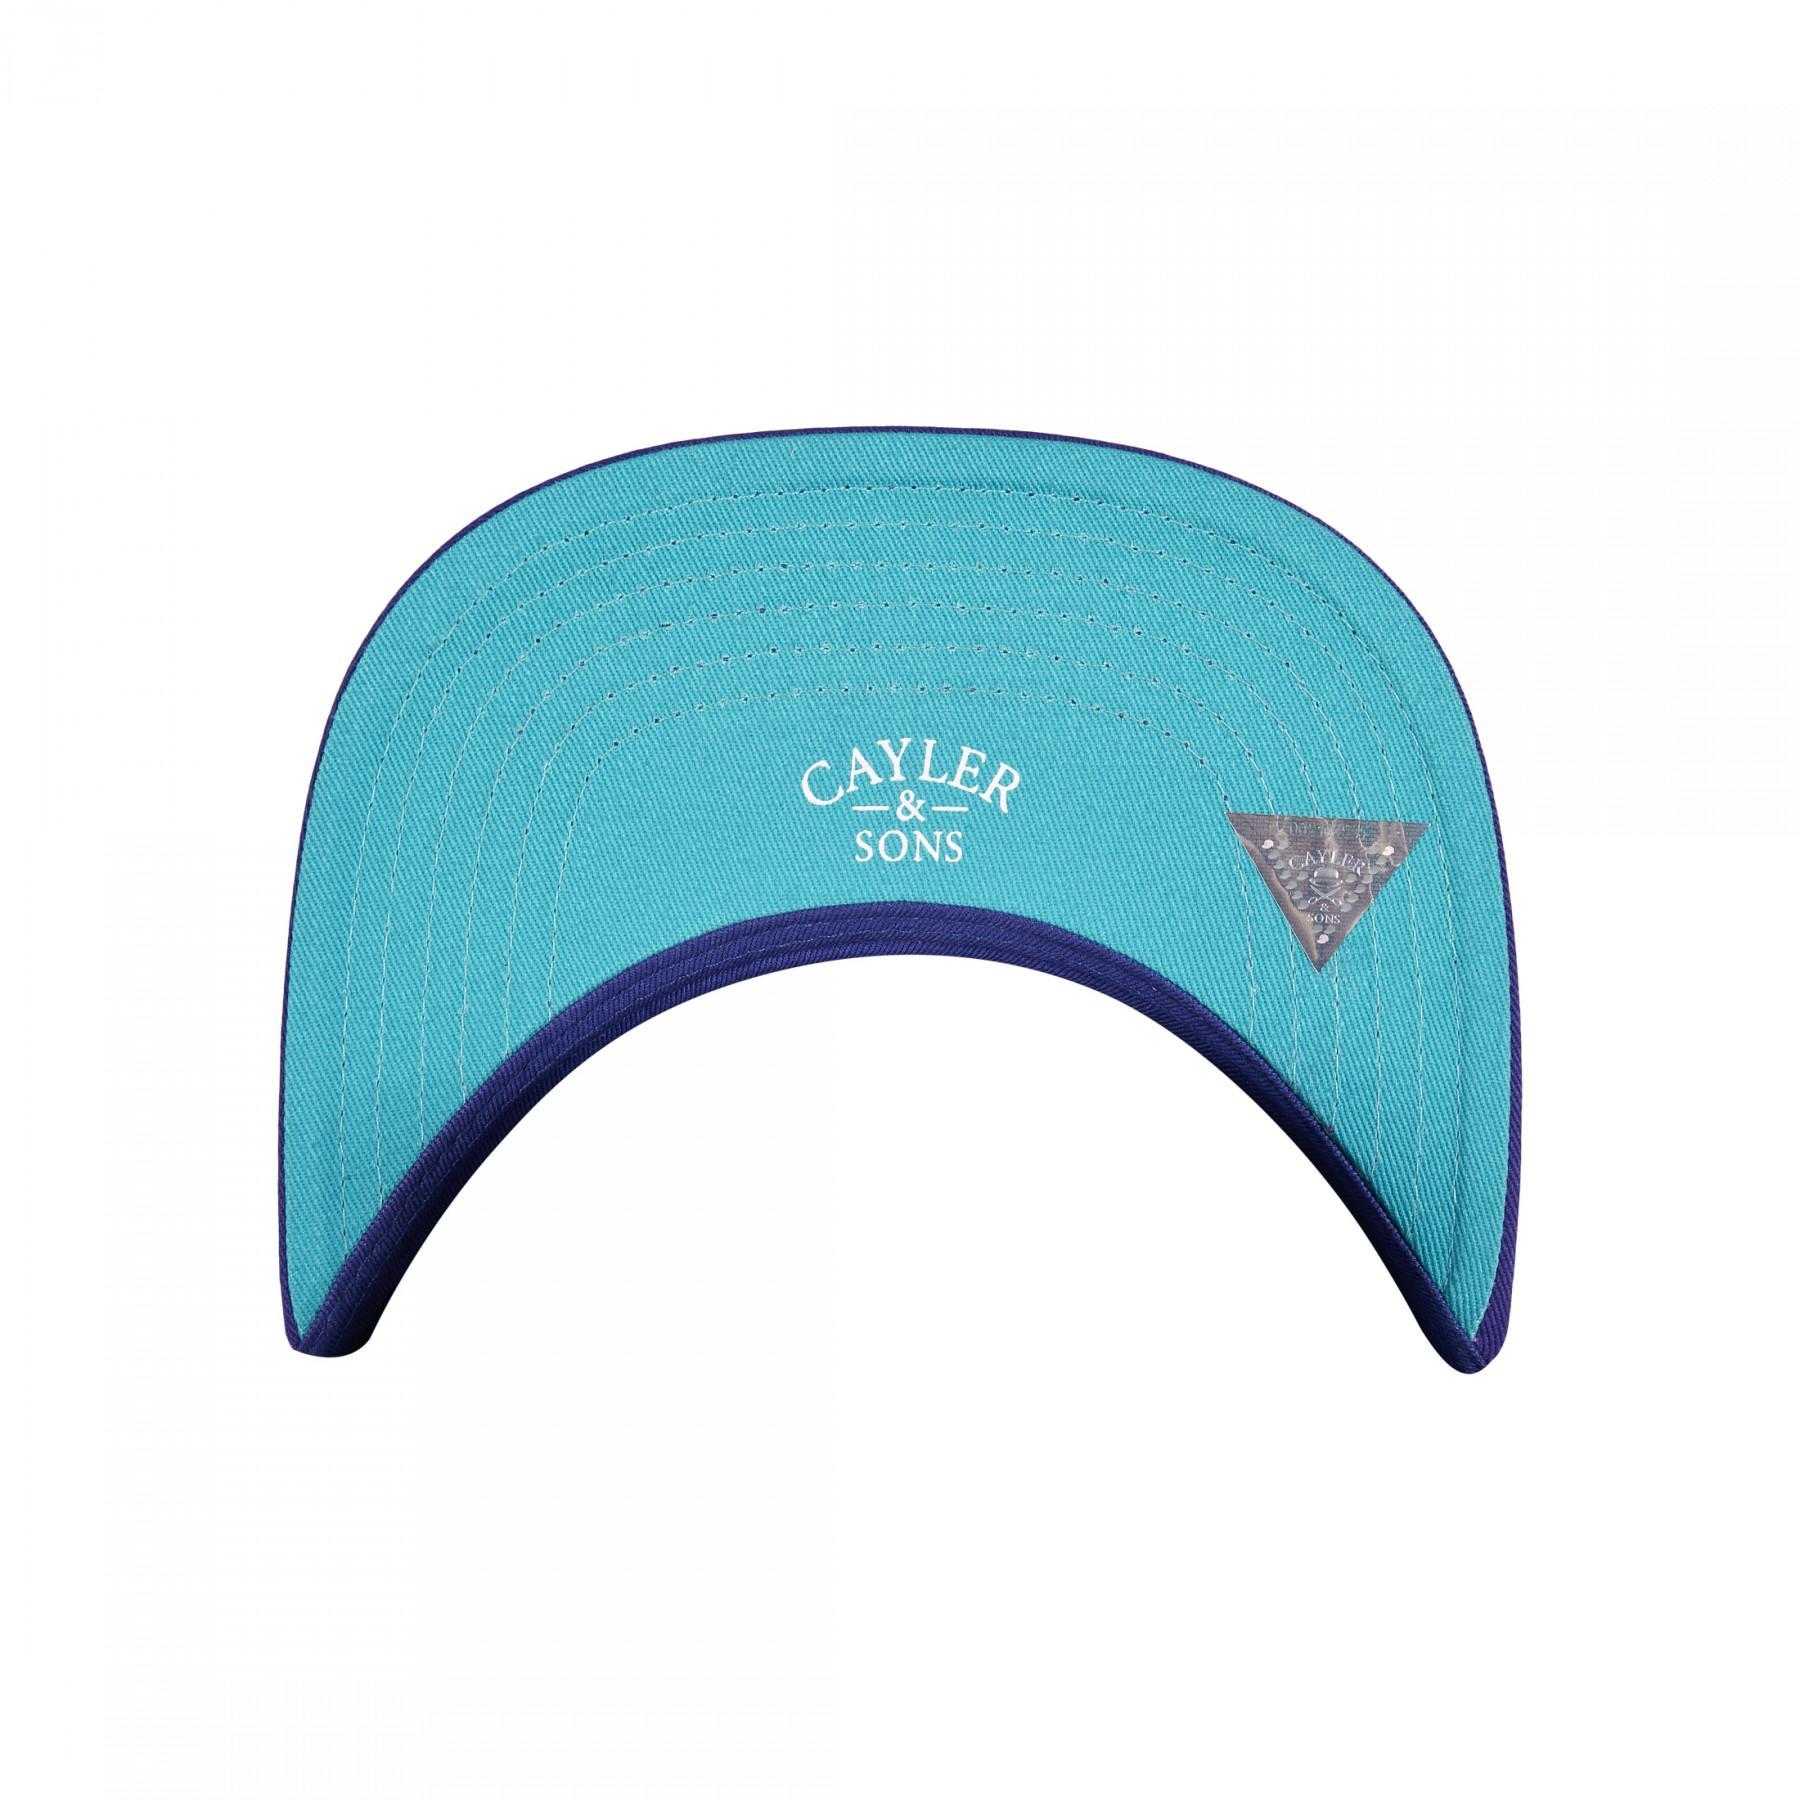 Casquette Cayler & Sons miami vibes